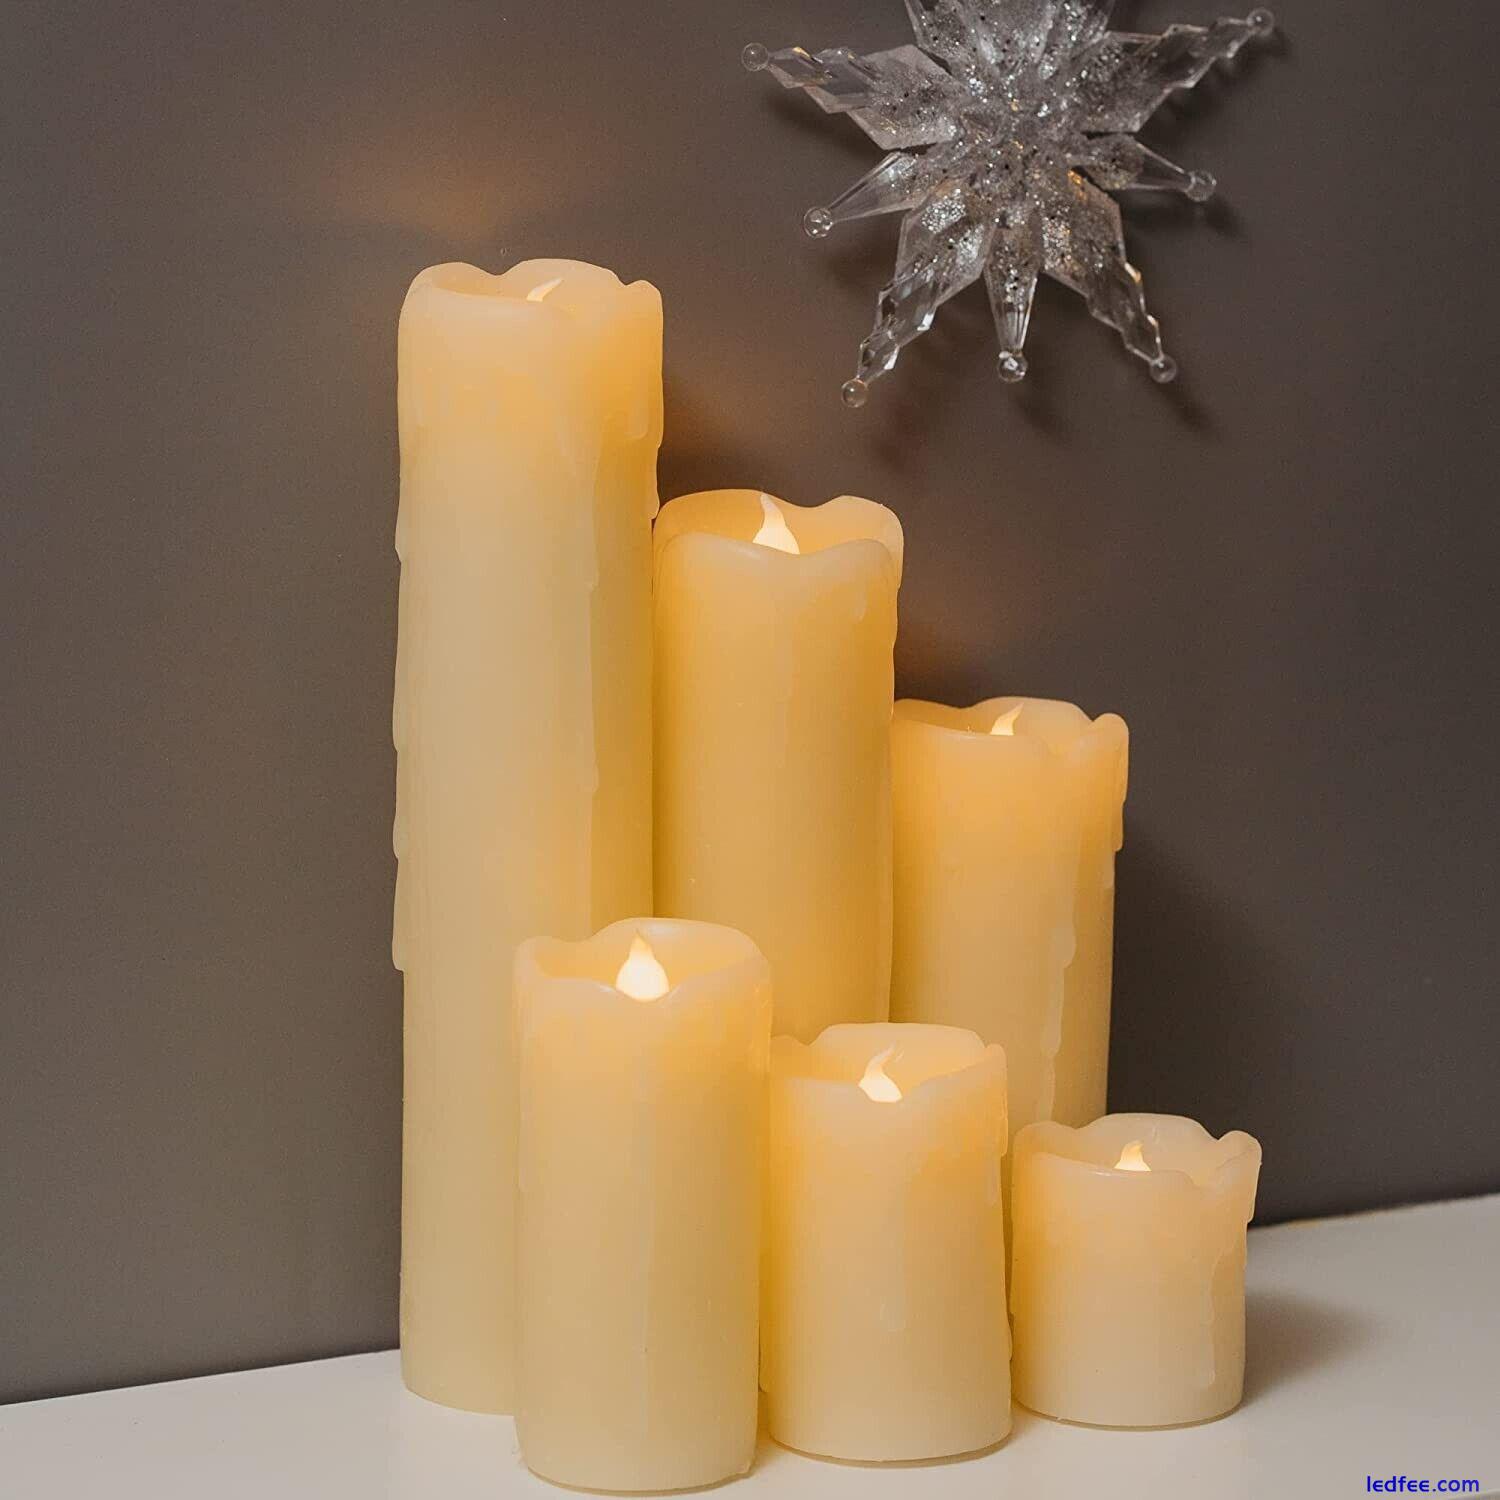 6-Piece Flameless Candle Set – Flickering LED Candles with Wax Drip Effect 1 